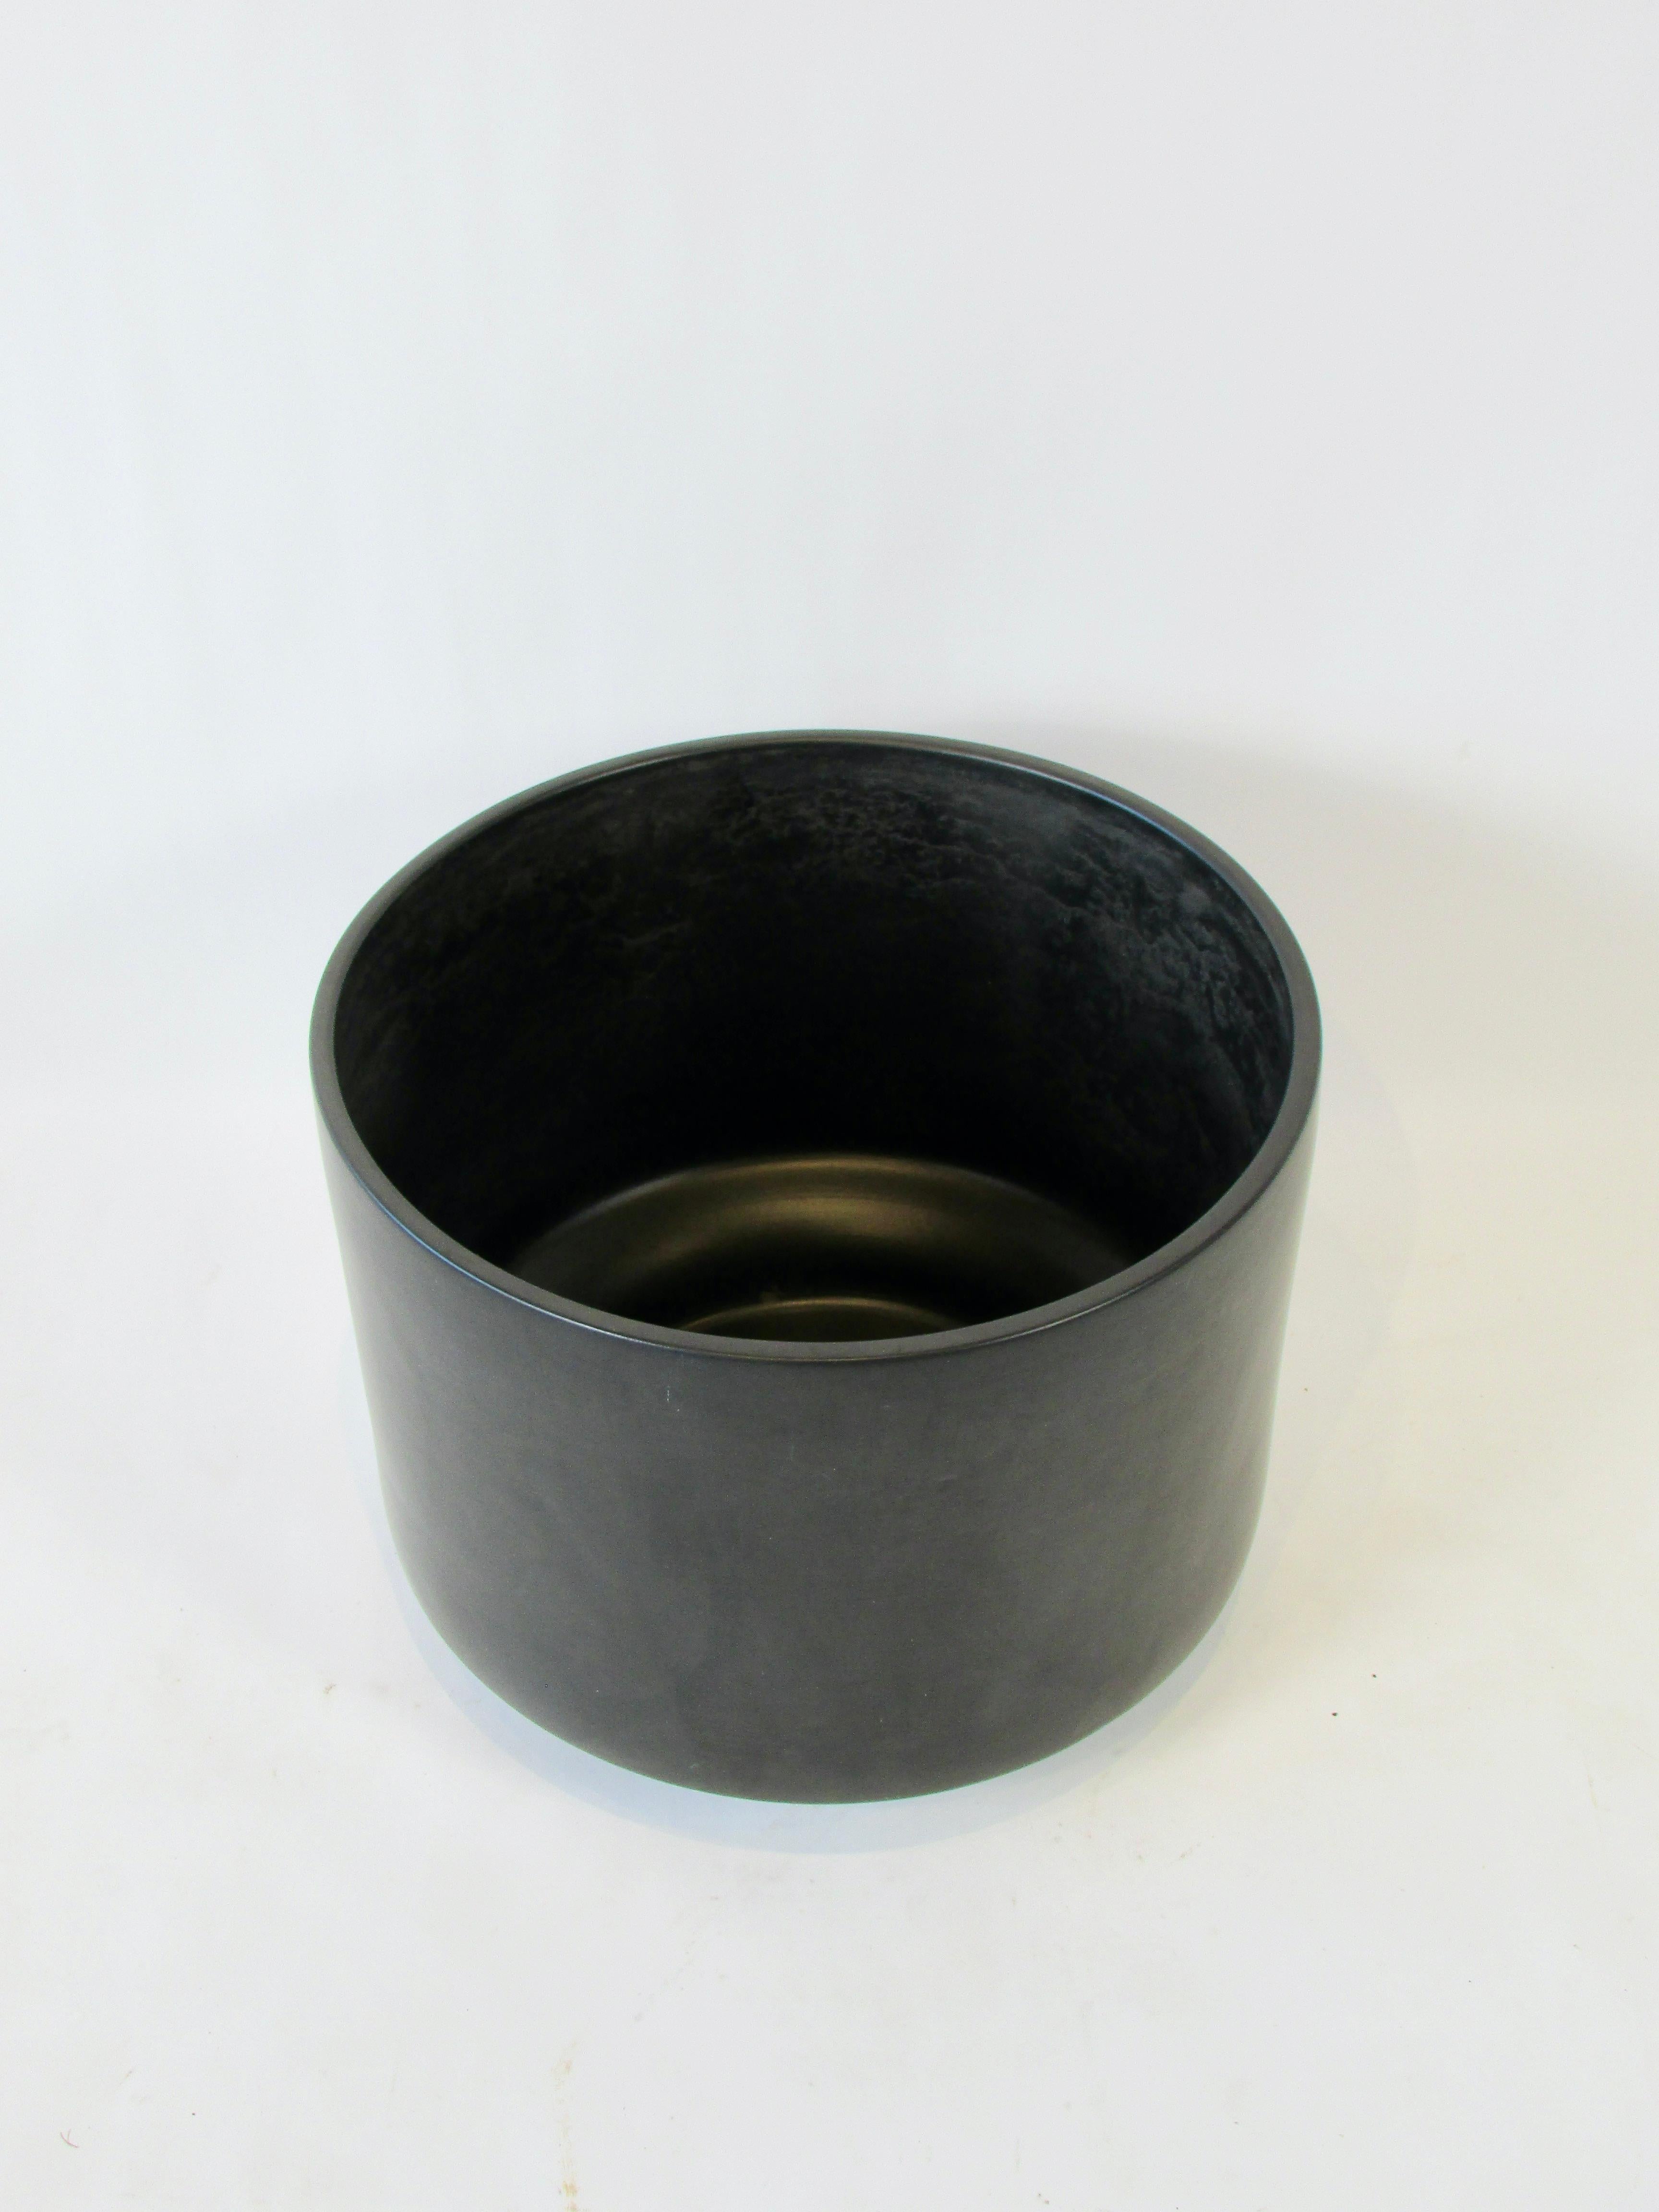 Large Gainey of Laverne California planter pot. Finished in a matte black glaze. No cracks or chips no drill through. Very clean exterior. Evidence of use shows on interior side walls.